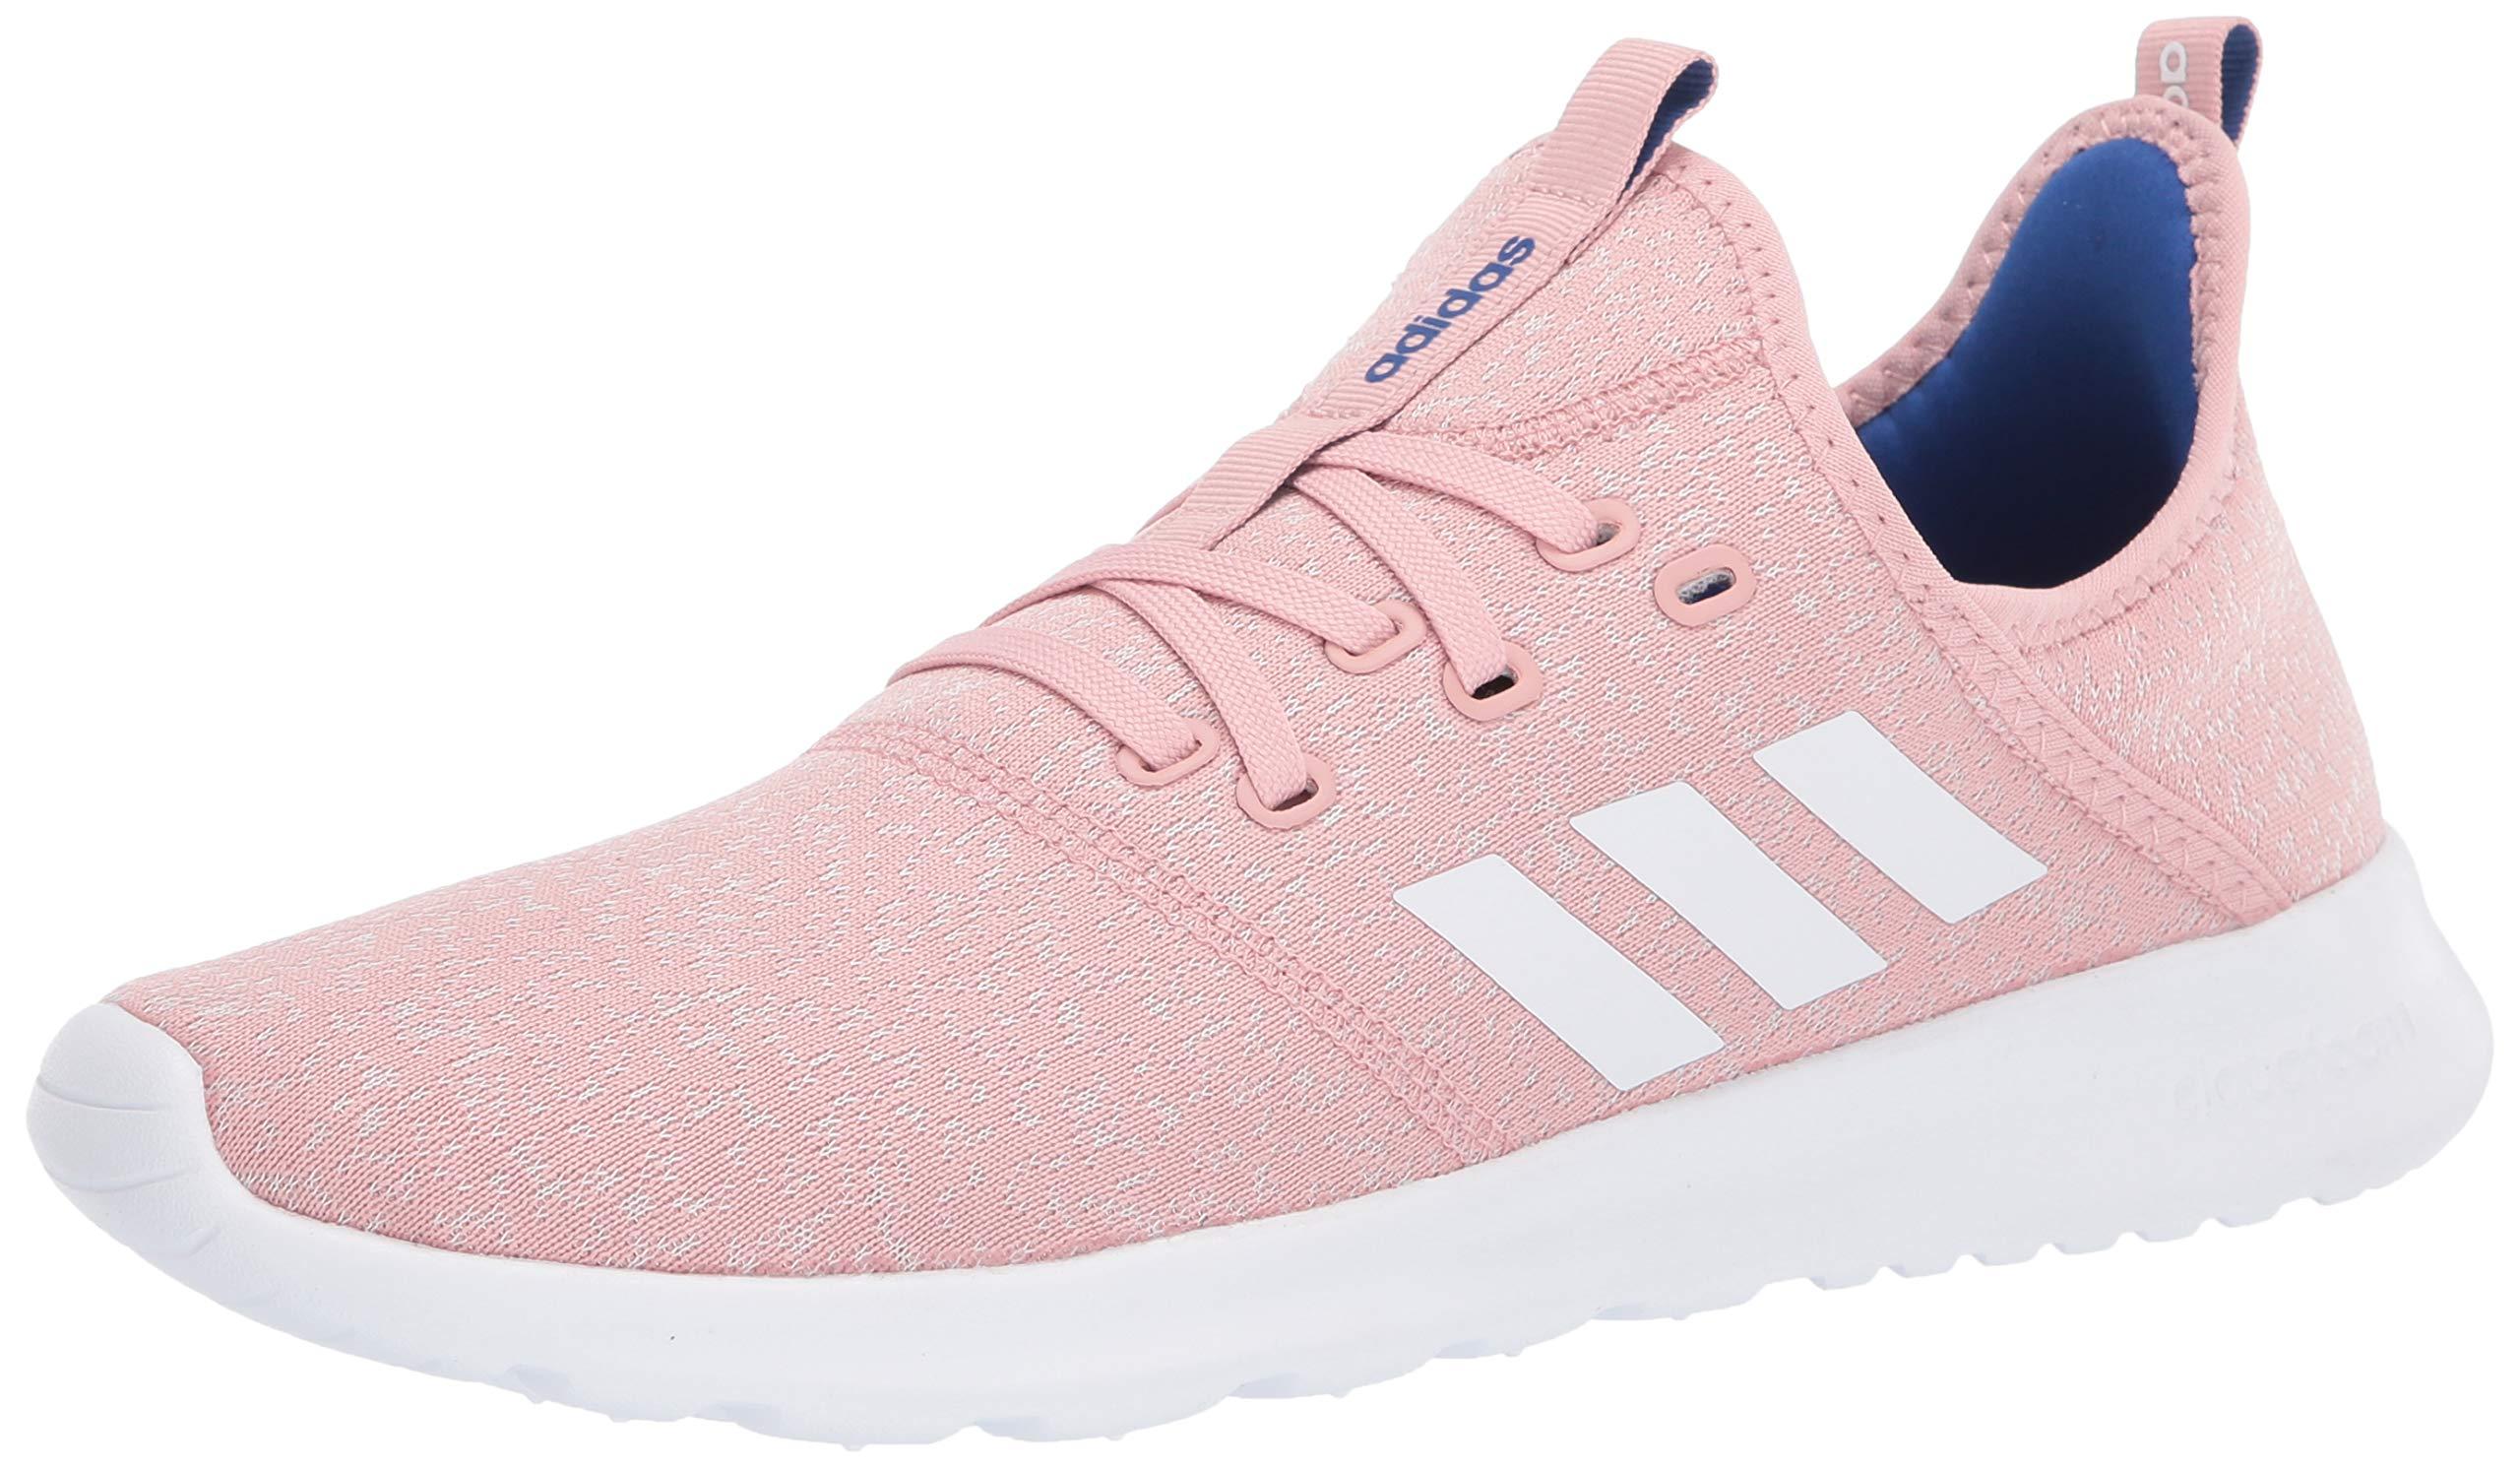 Rudyard Kipling stimulate hot adidas Synthetic Cloudfoam Pure Running Shoe in Pink | Lyst